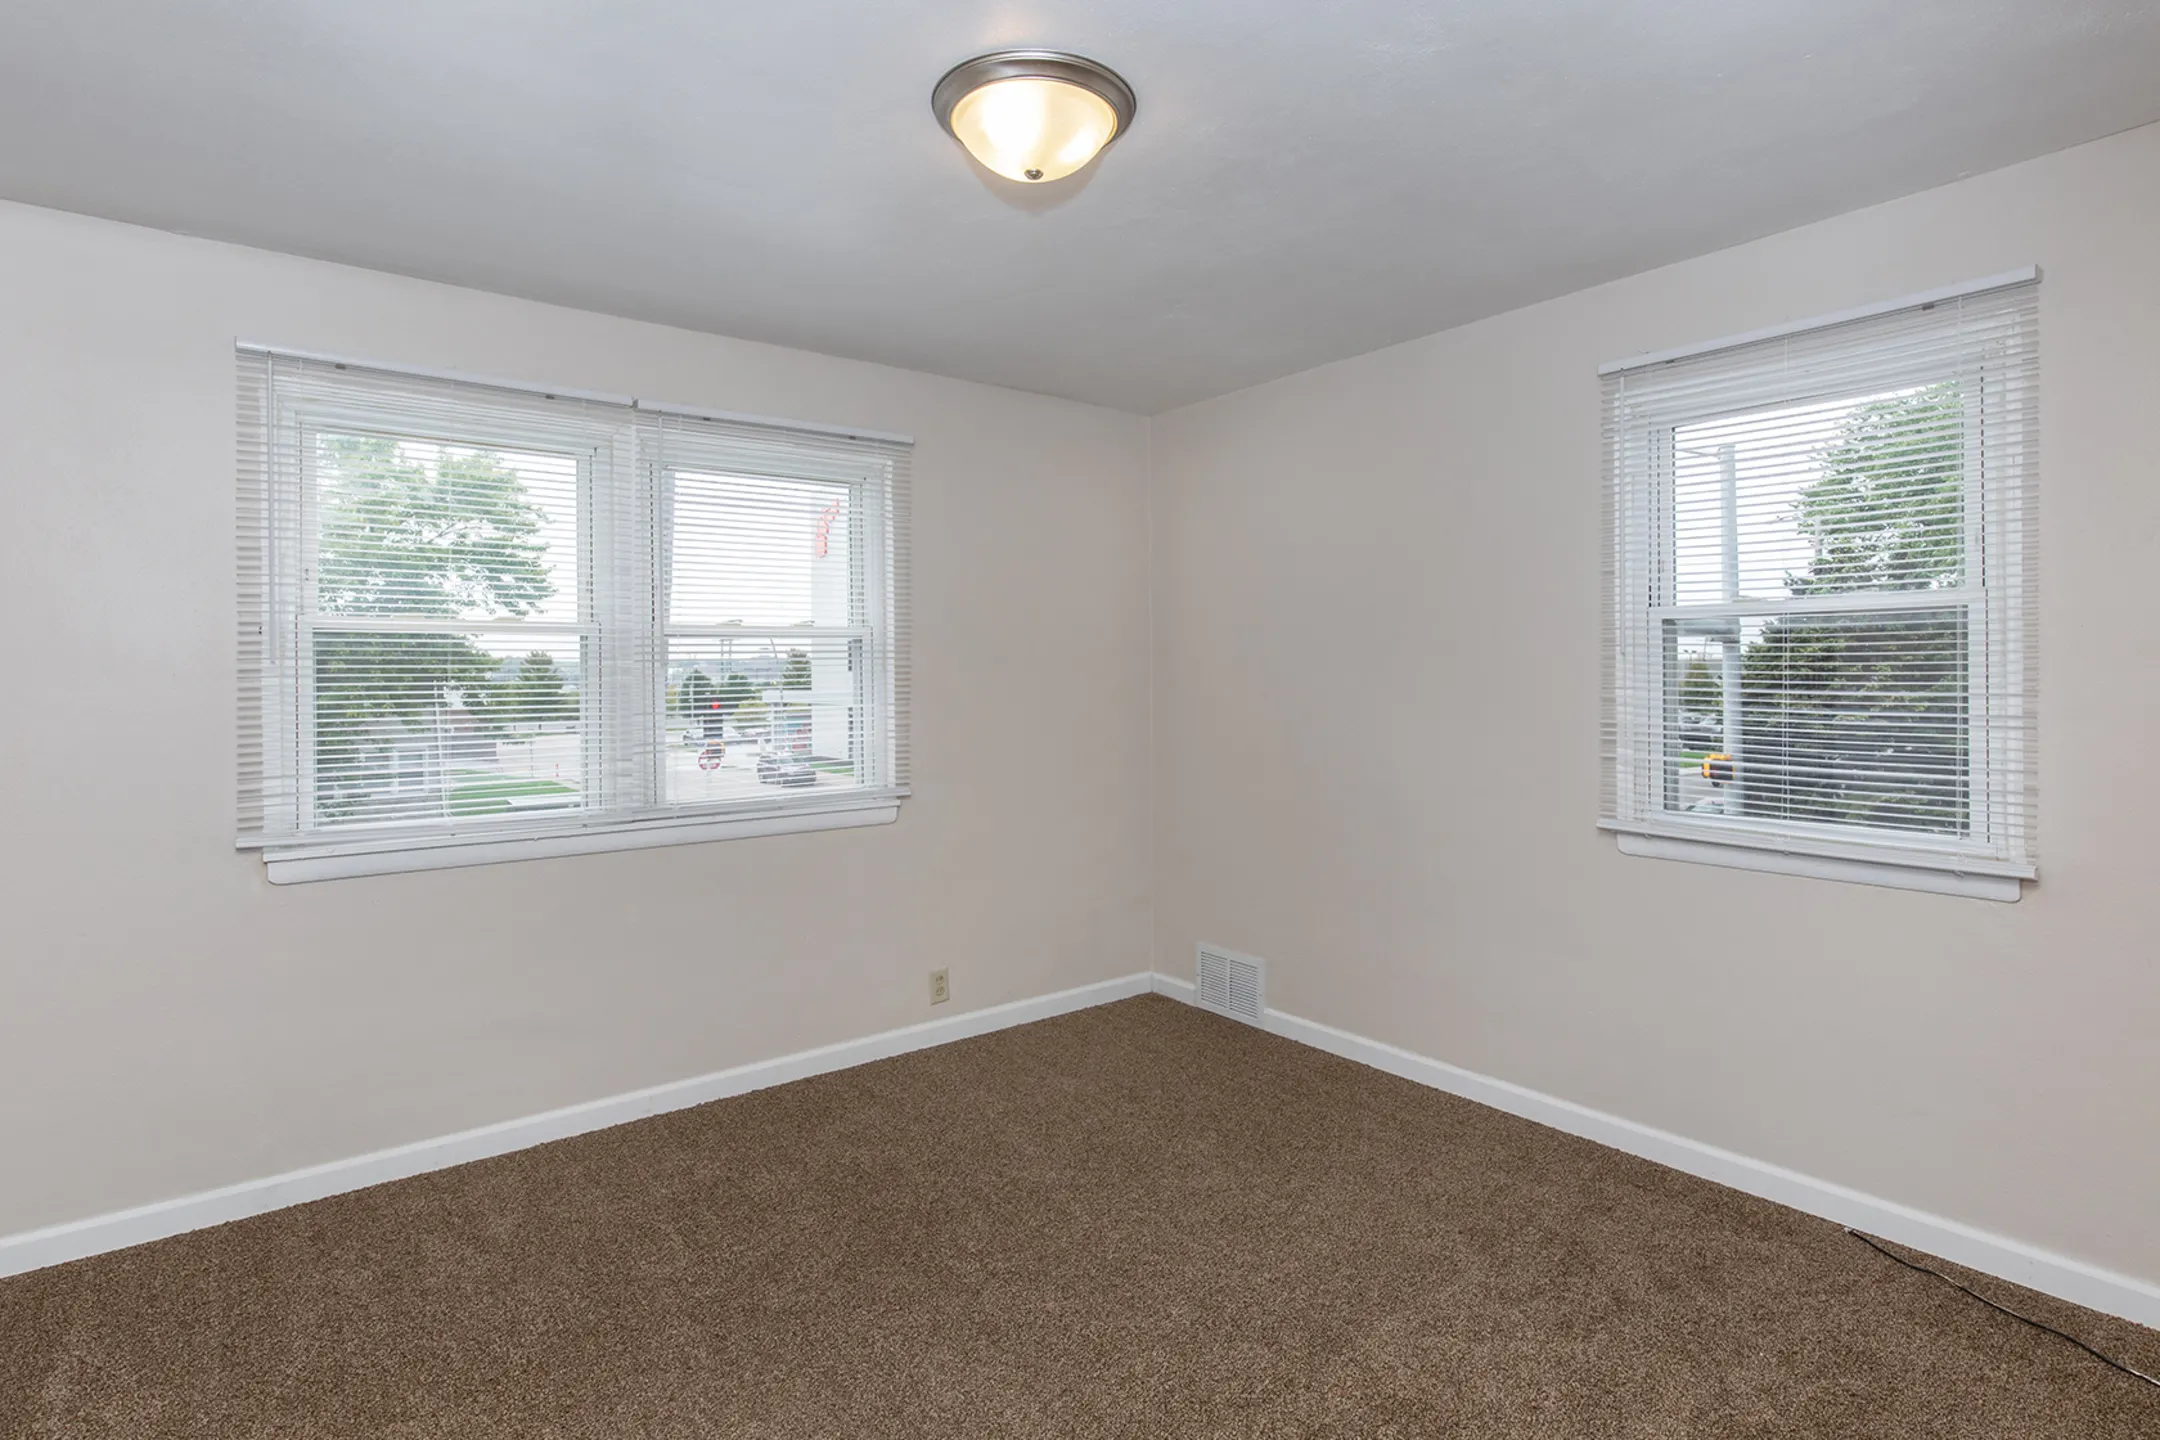 Bedroom - Downtown Town Homes - Bettendorf, IA